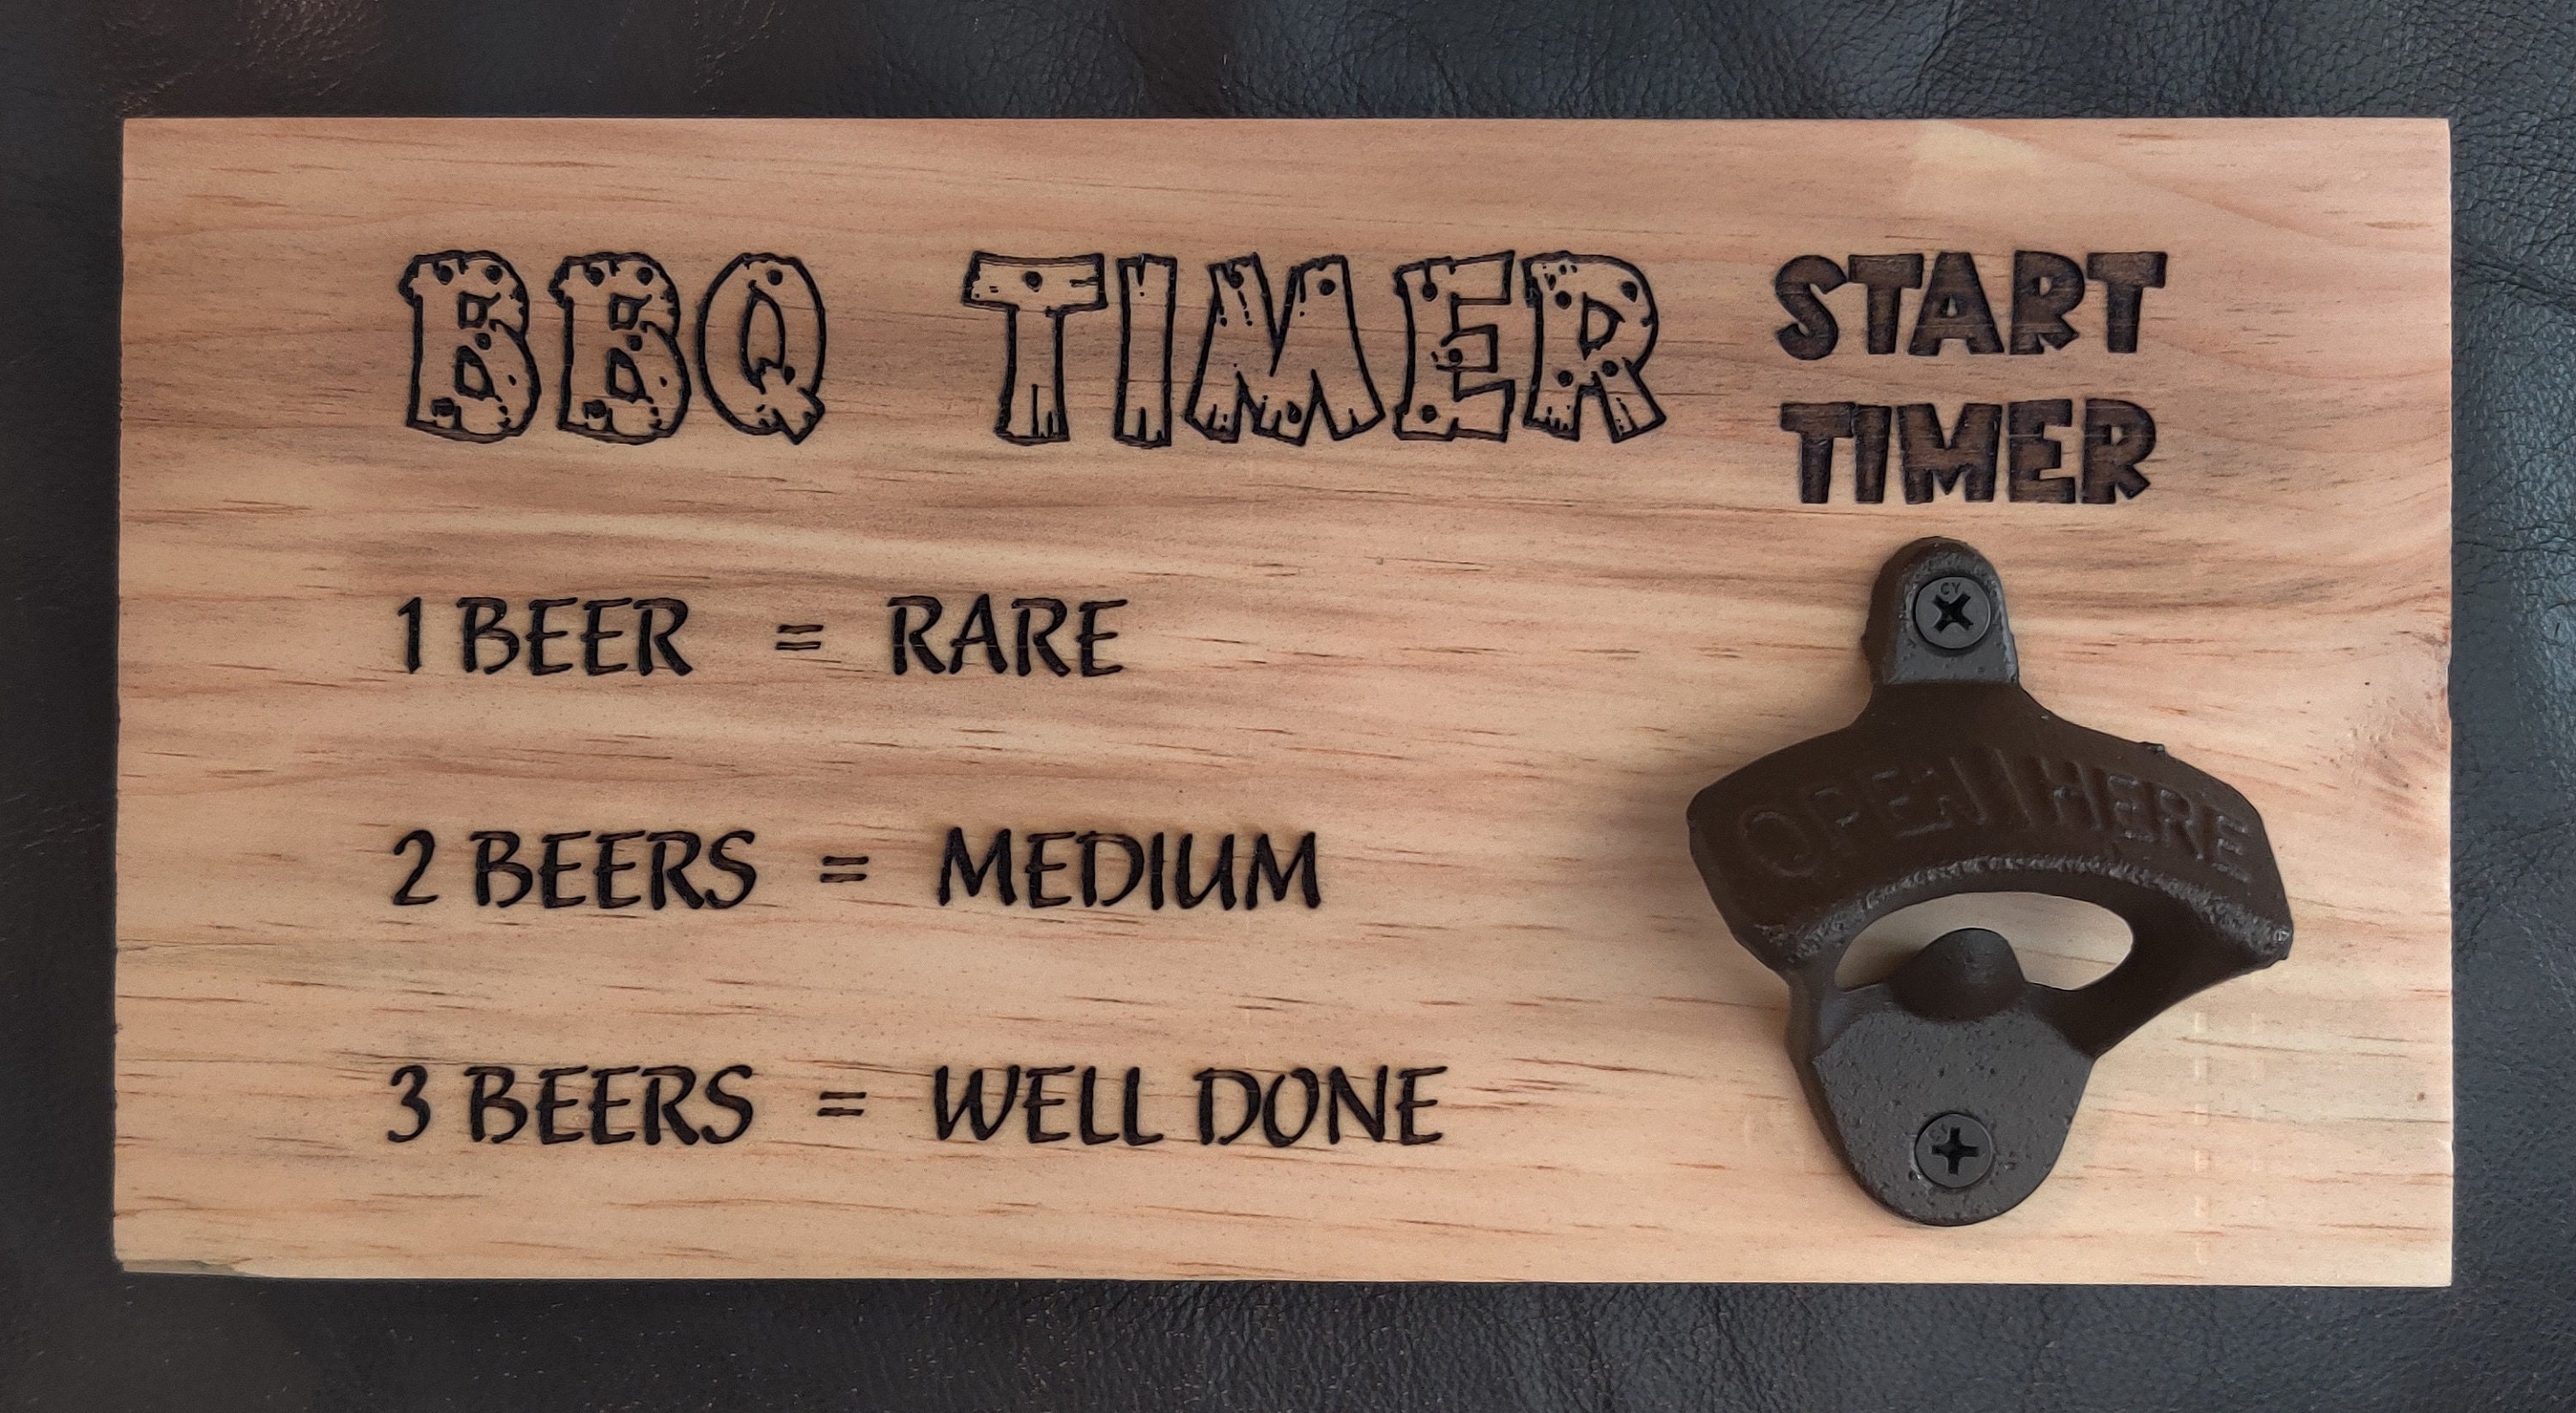 Funny Grilling Barbecue Timer Beer BBQ Grilling Wood Print by EQ